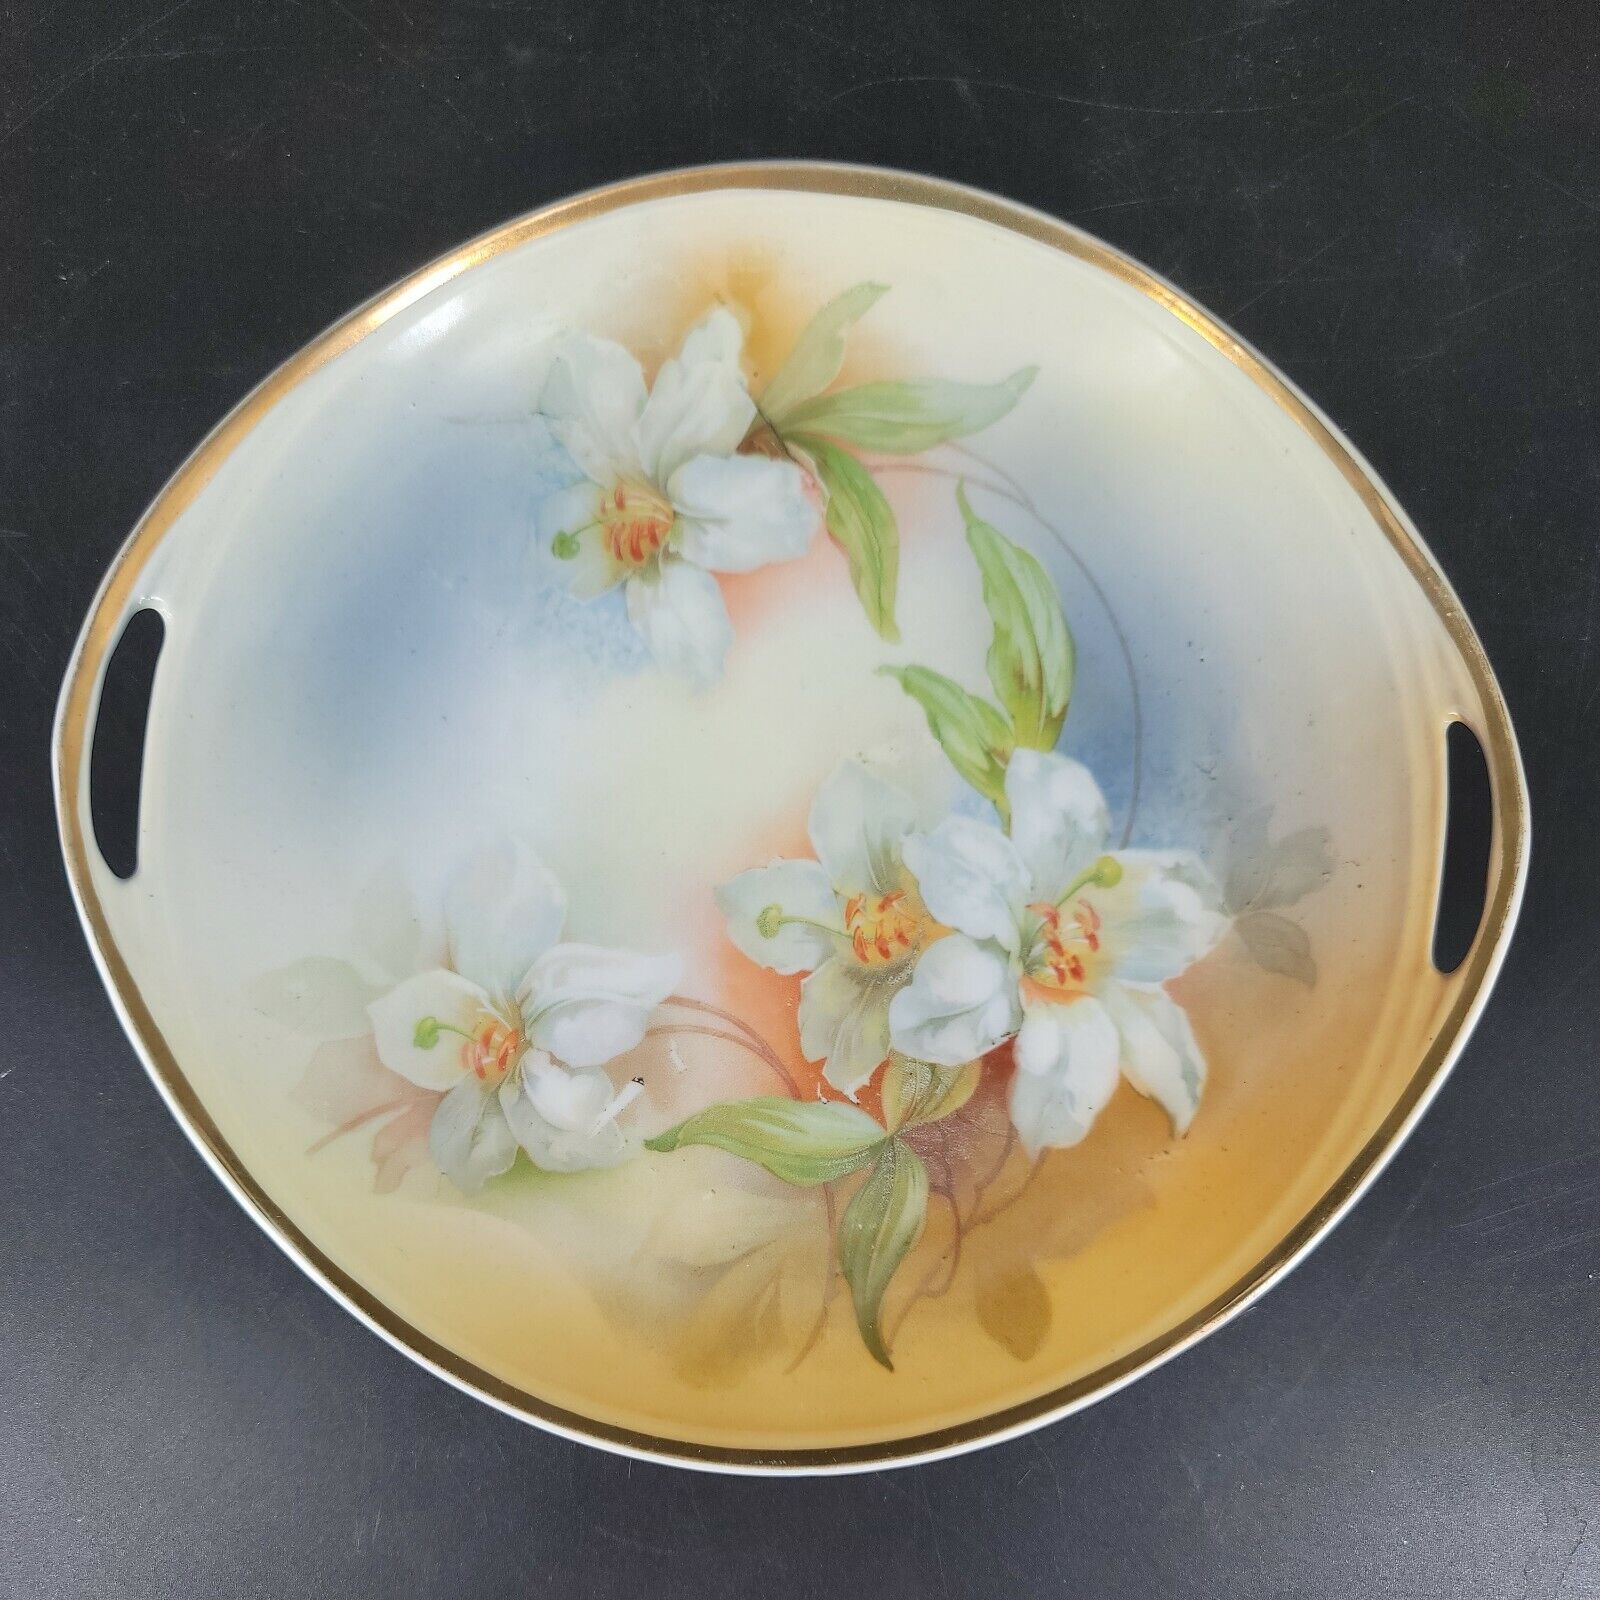 Antique 1920s CT Silesia Altwasser Germany Cake Plate Handpainted White Lily